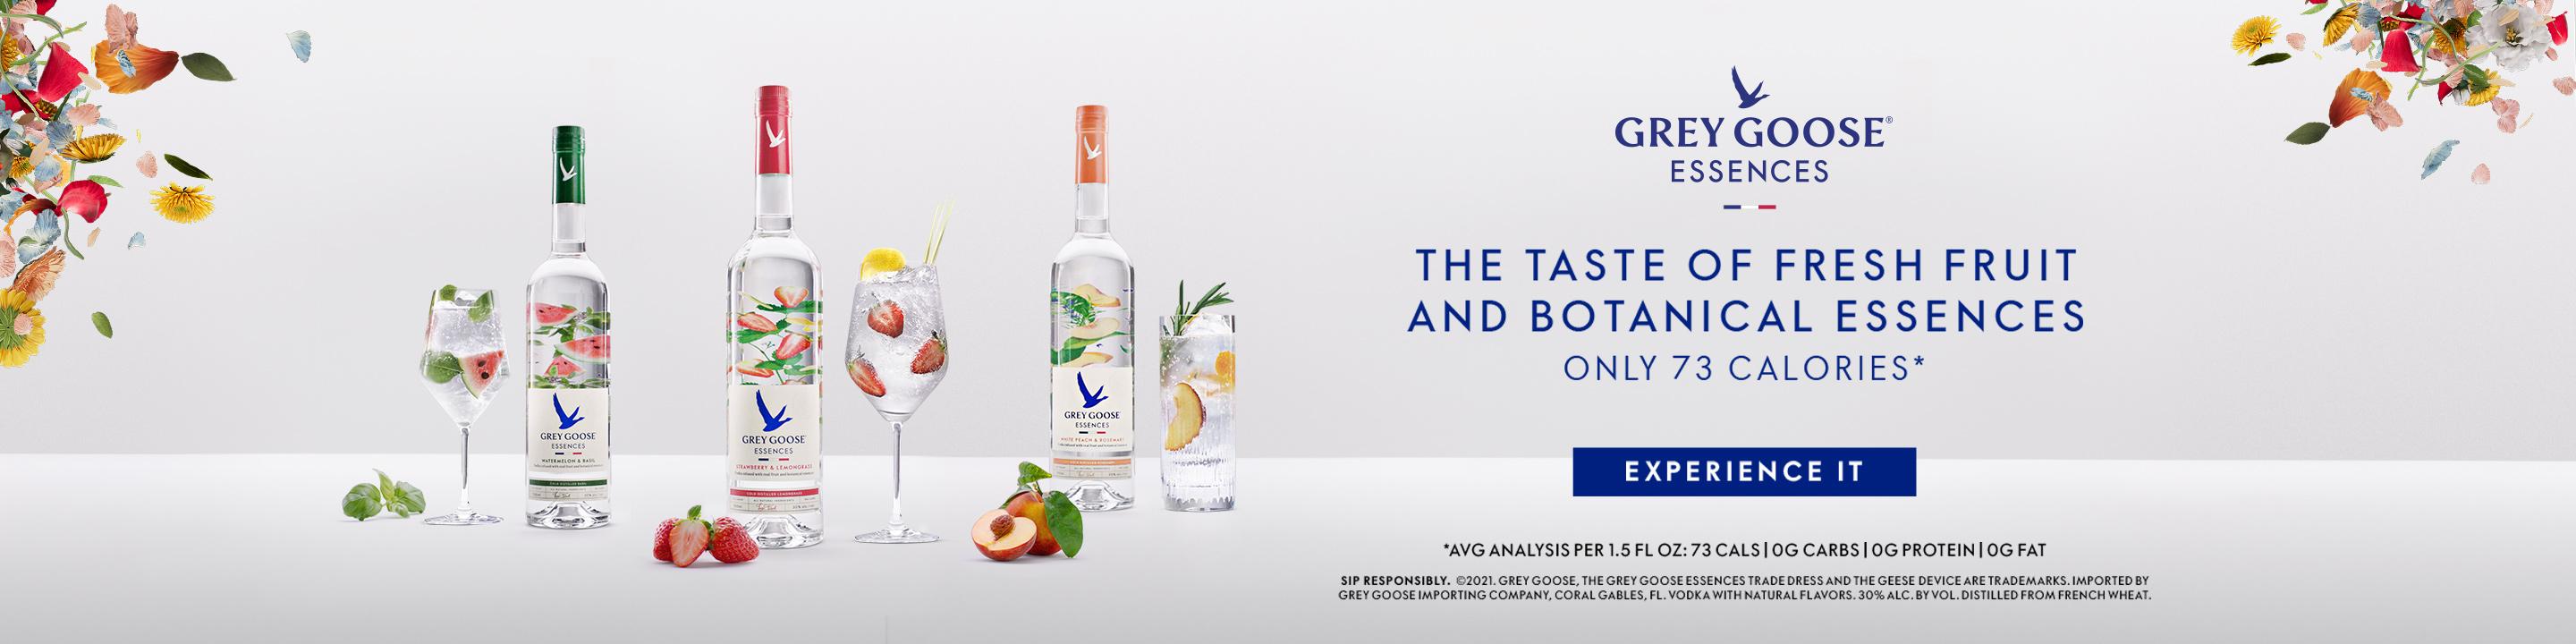 GREY GOOSE® Vodka is crafted with only the finest French ingredients - soft winter wheat from the Picardie region and pure spring water from Gensac in the Cognac region. These fine ingredients are nurtured, isolated and captured from field-to-bottle in an exclusive process designed and controlled by the extraordinary skills and commitment of our Maître de Chai (Cellar Master), François Thibault.

The perfect cocktail begins with the extraordinary character of Grey Goose, the World’s Best Tasting Vodka. Whether enjoyed by itself or mixed with fresh ingredients, it is the perfect gift to elevate any holiday gathering.